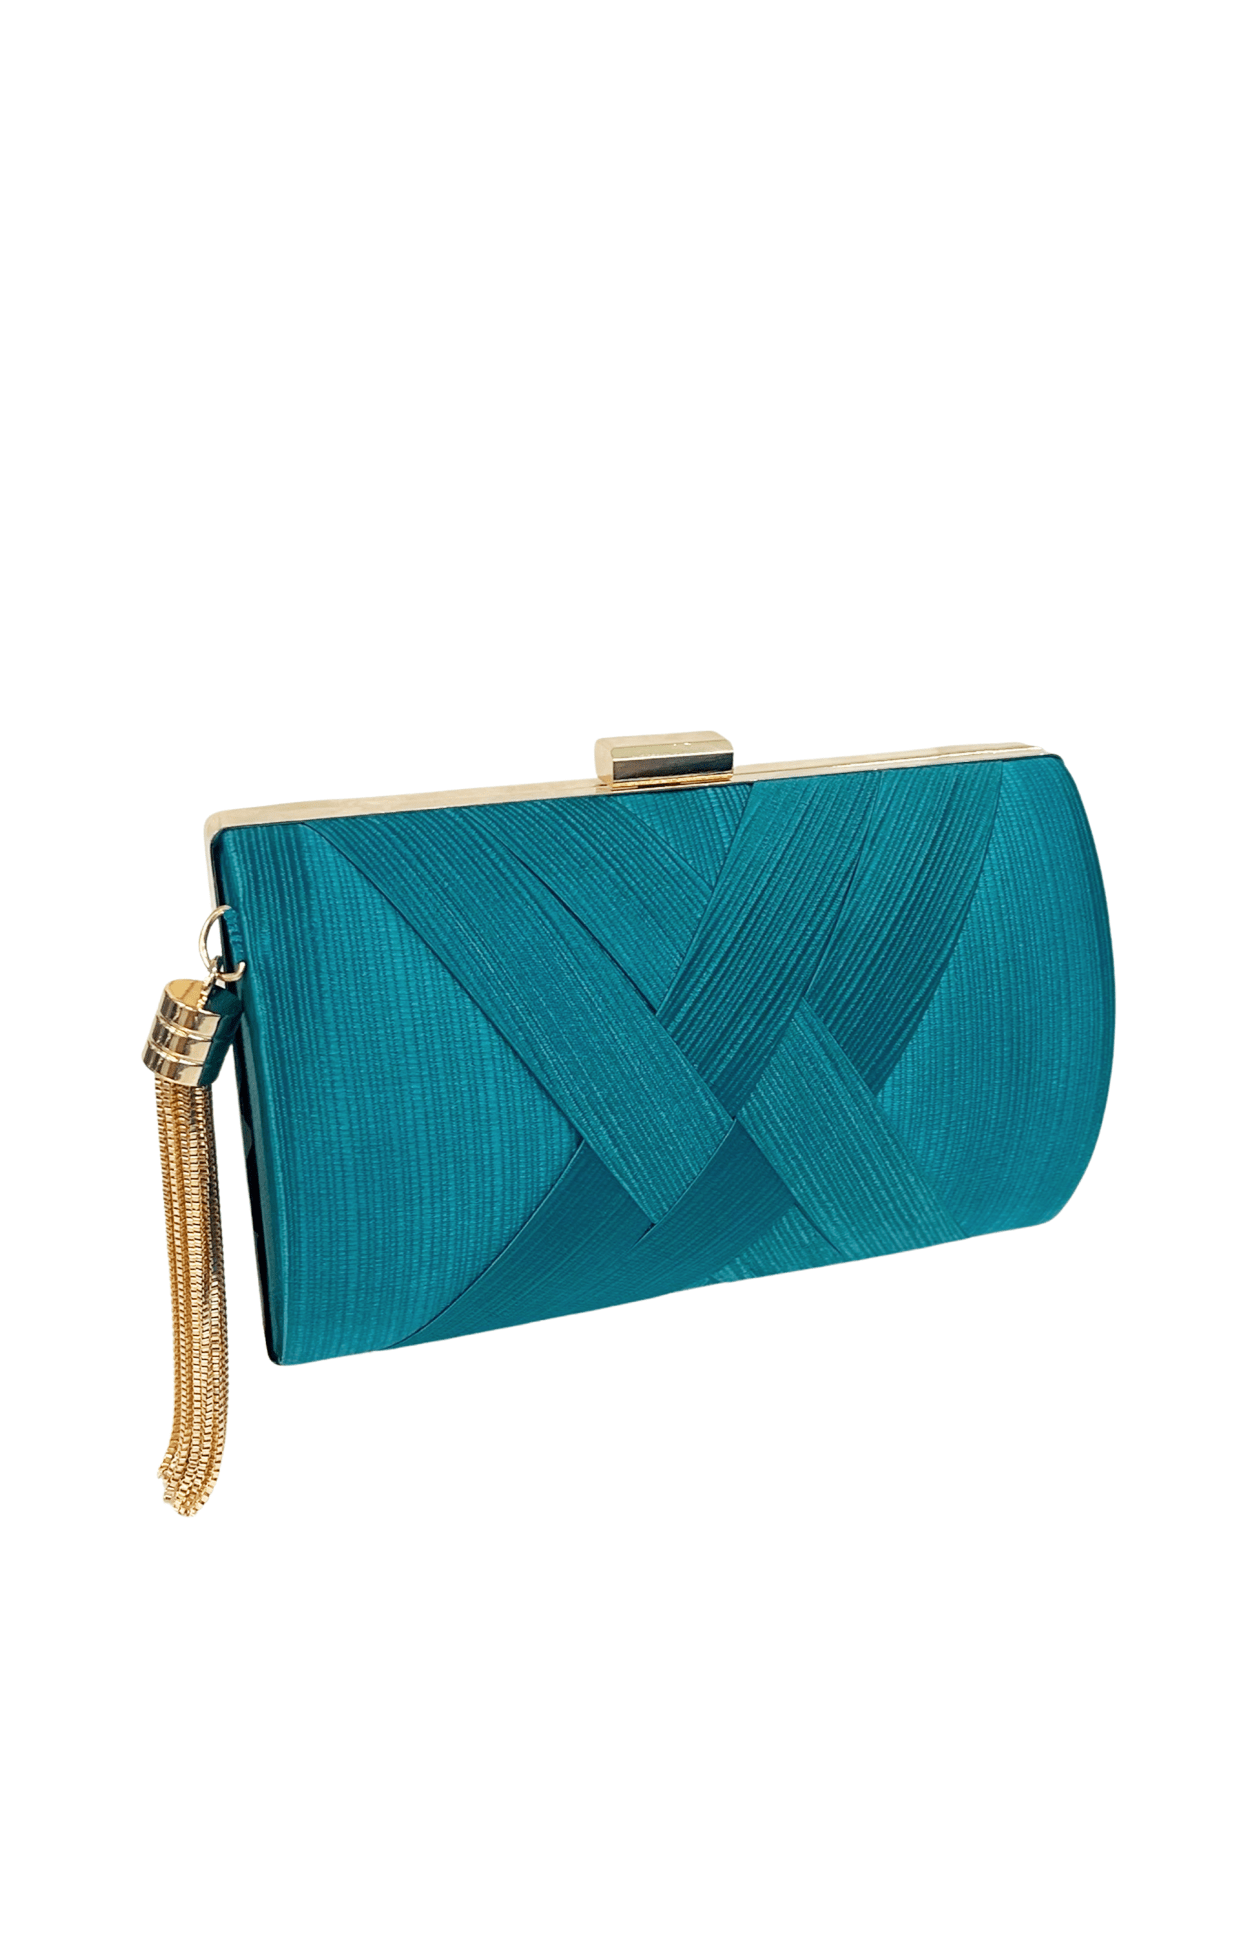 ACCESSORIES Bags Clutches One Size / Blue DEANNA EVENING BAG IN TEAL